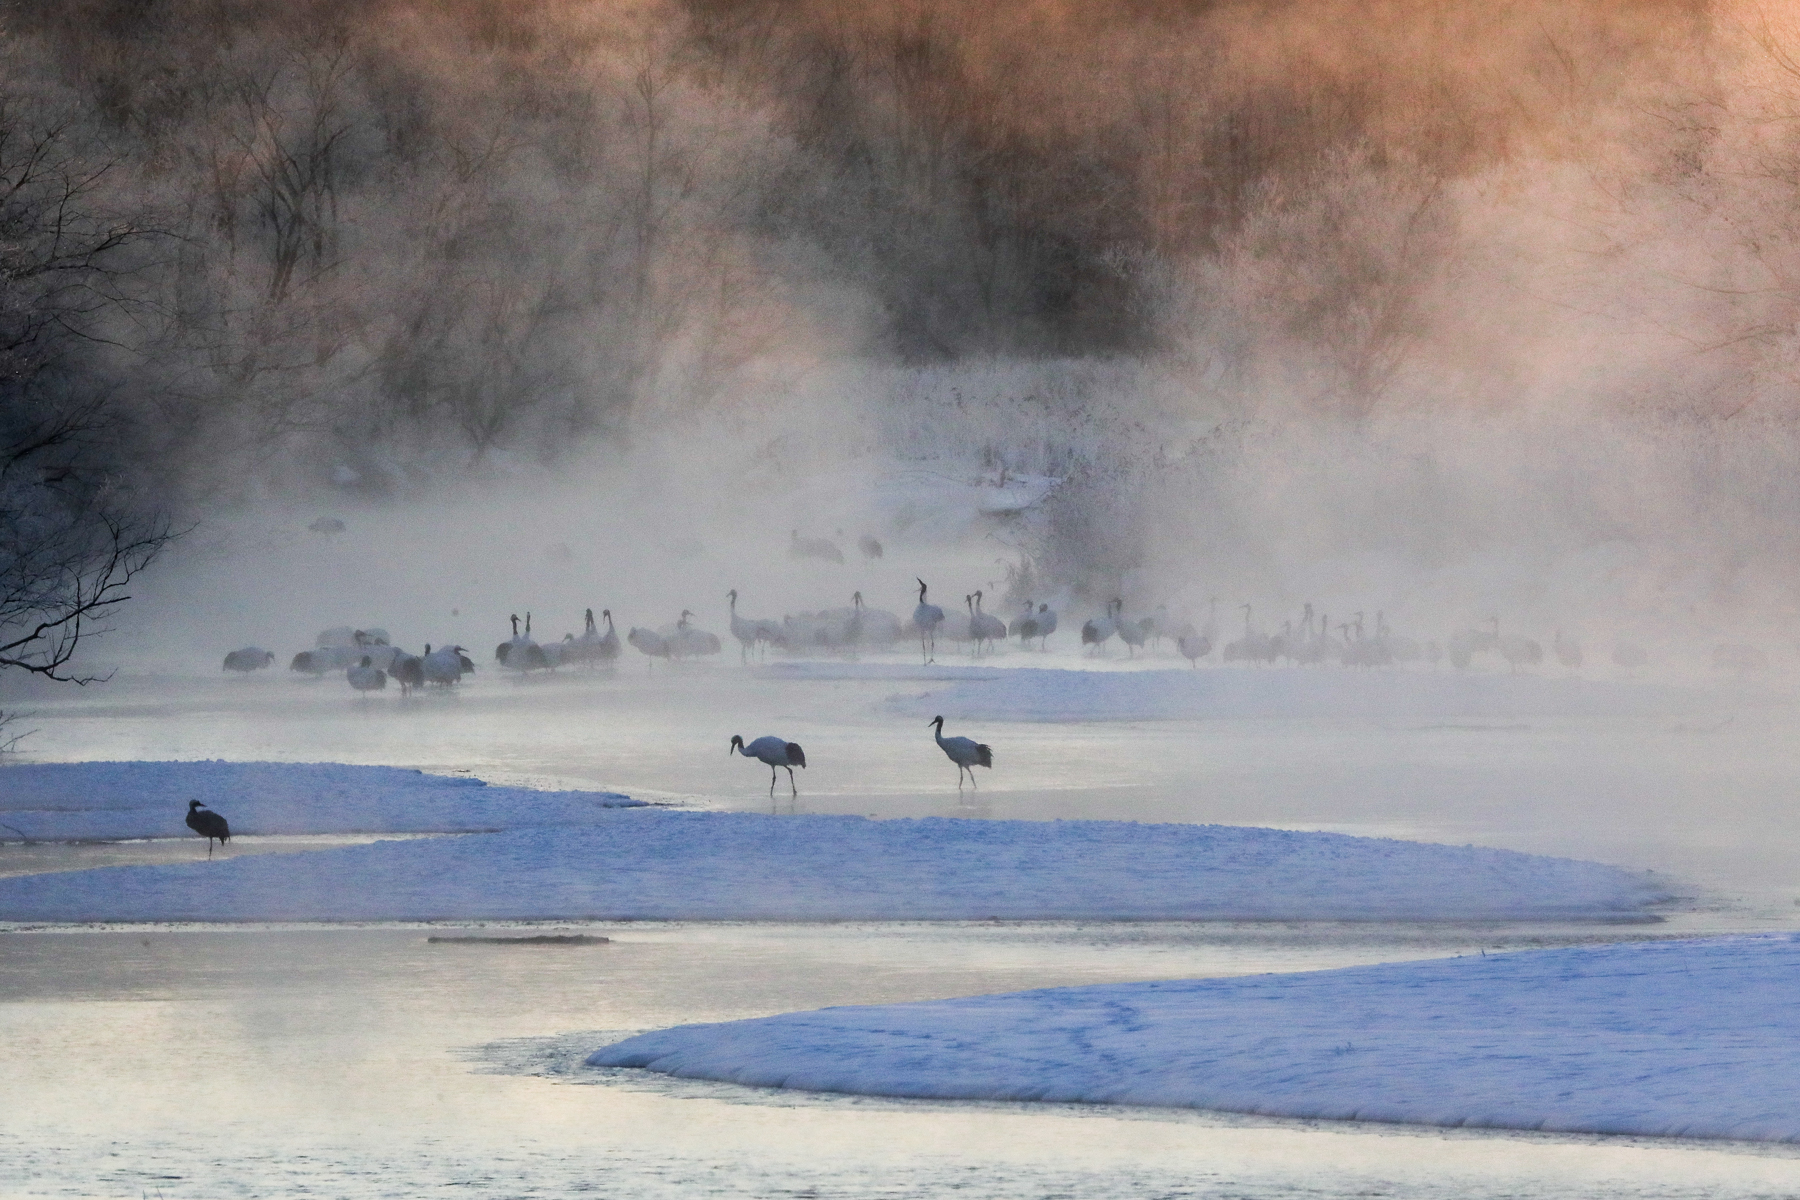 As the first sunlight catches the hoar-frost-covered trees at Otawa, the steam rising from the river adds to the other-worldly scene